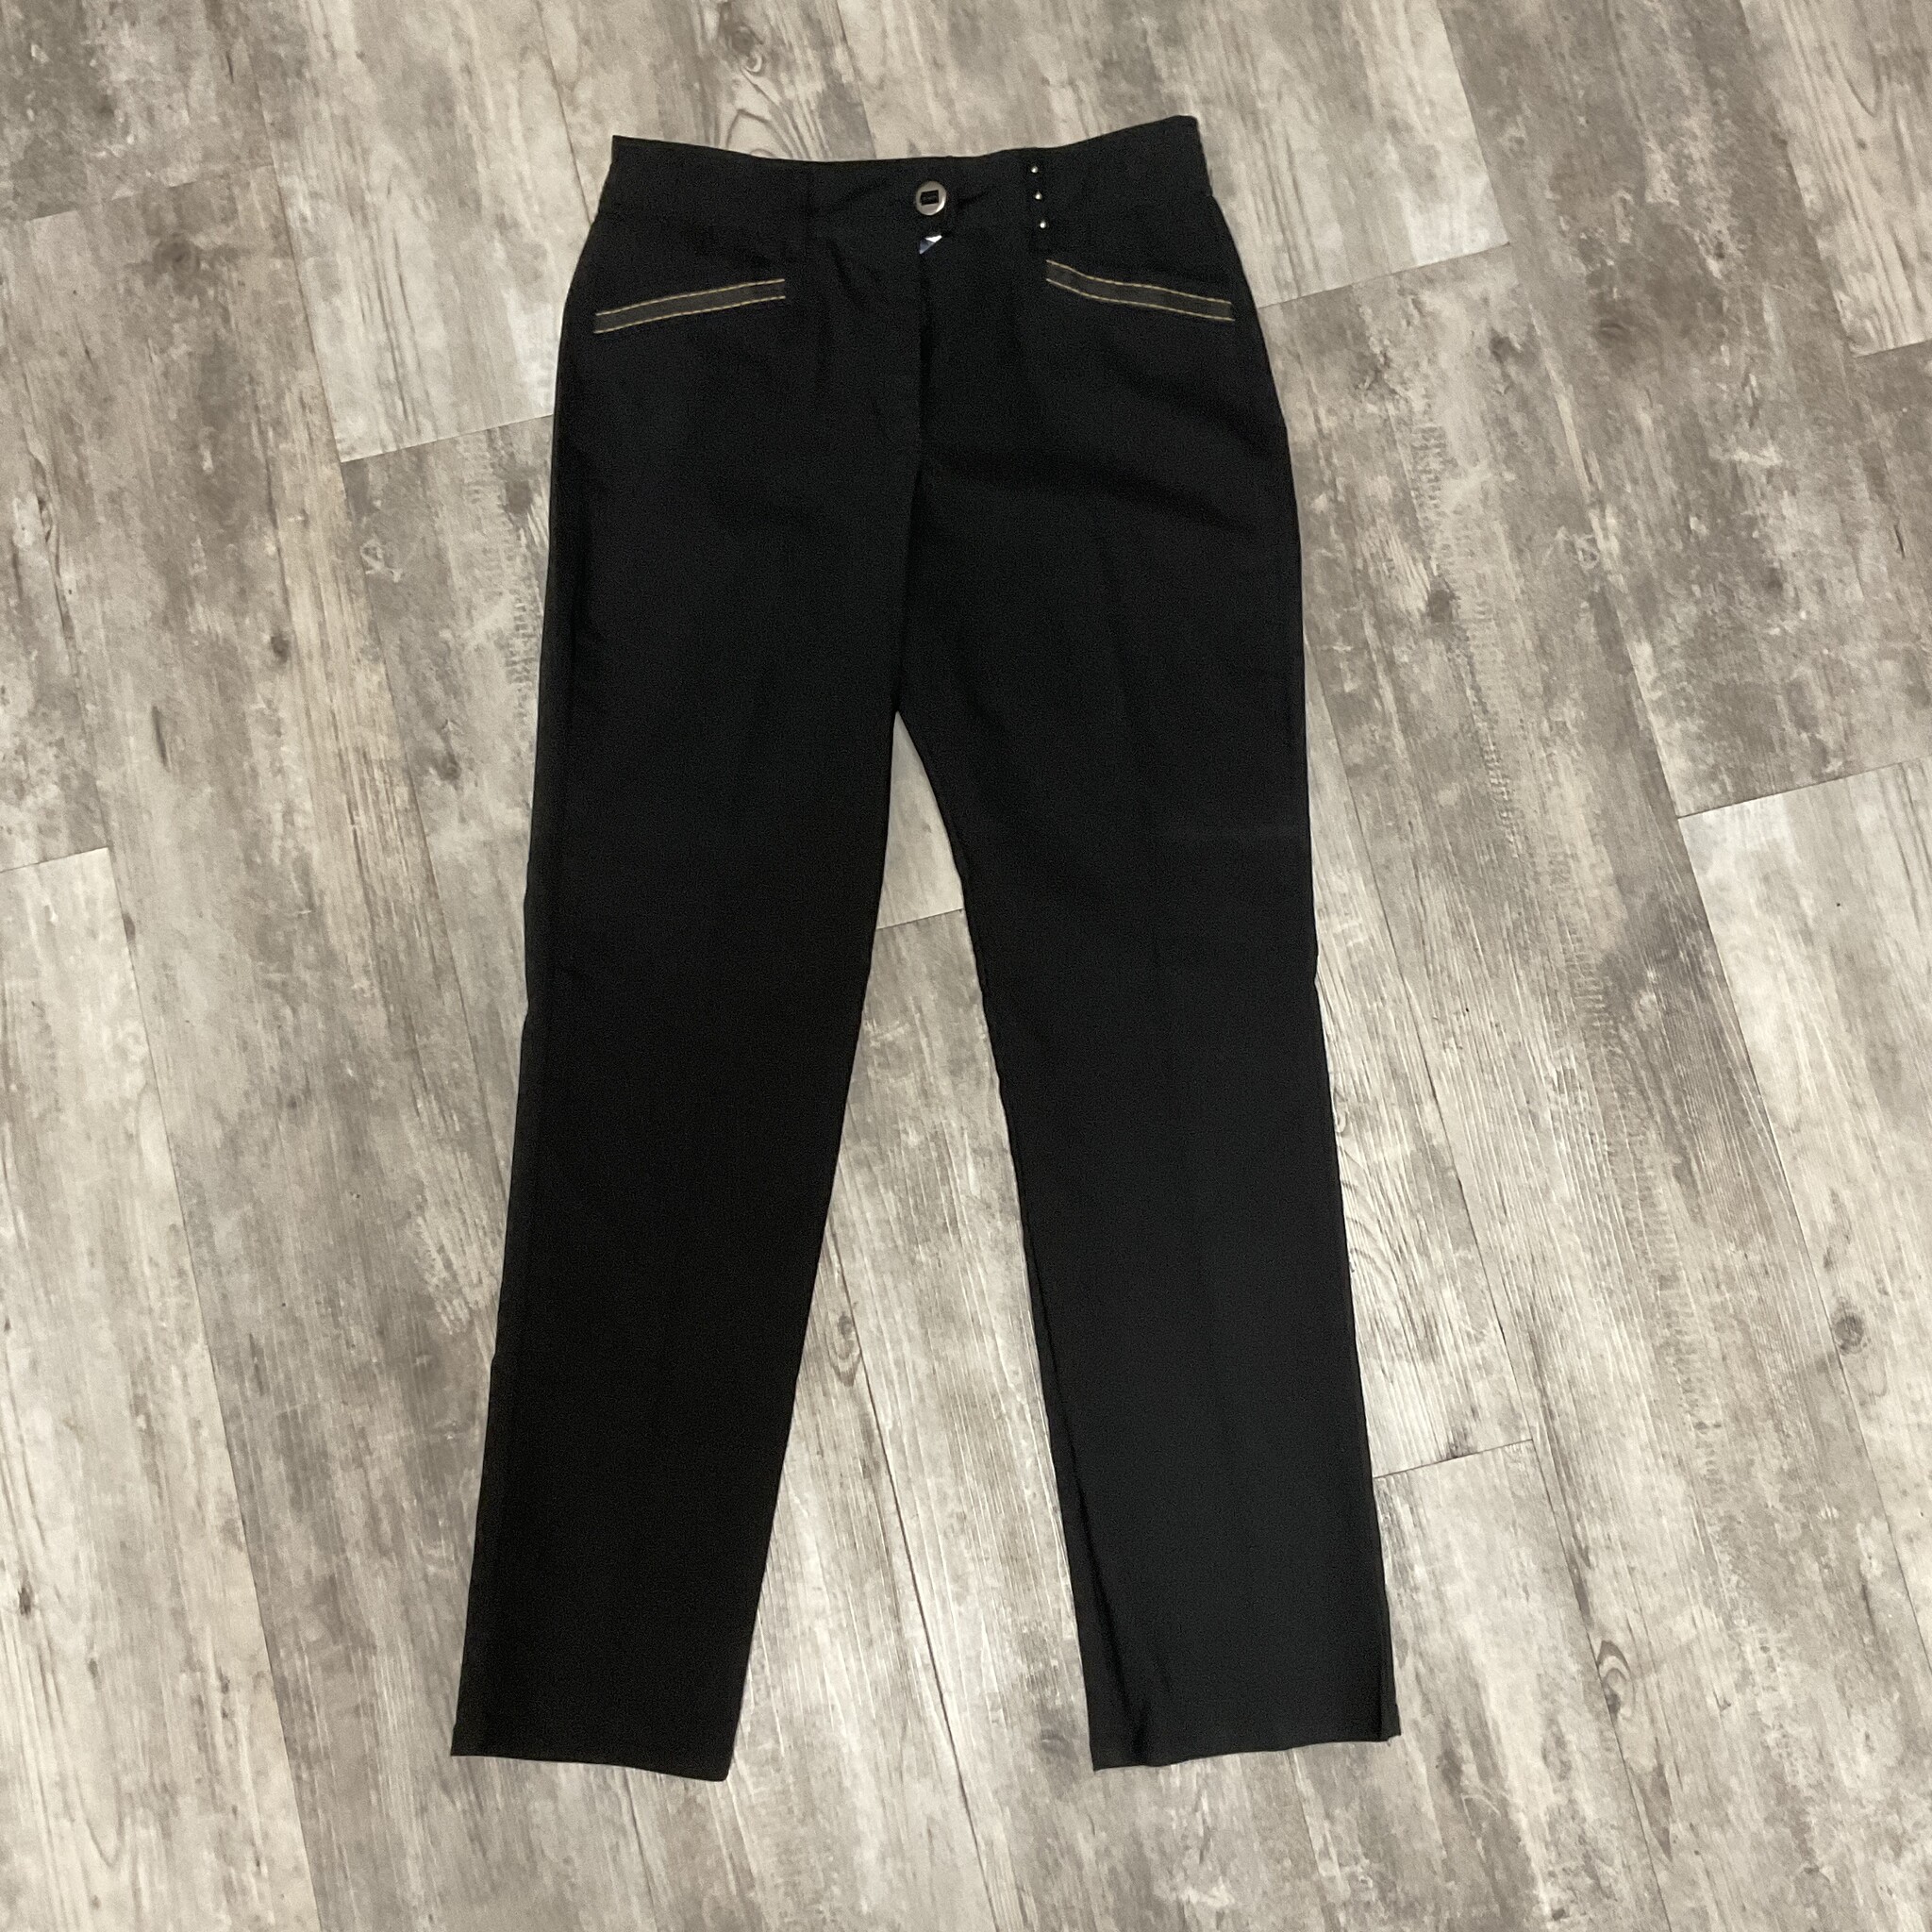 Lightweight Black Pant with Stitch Accent Size 10